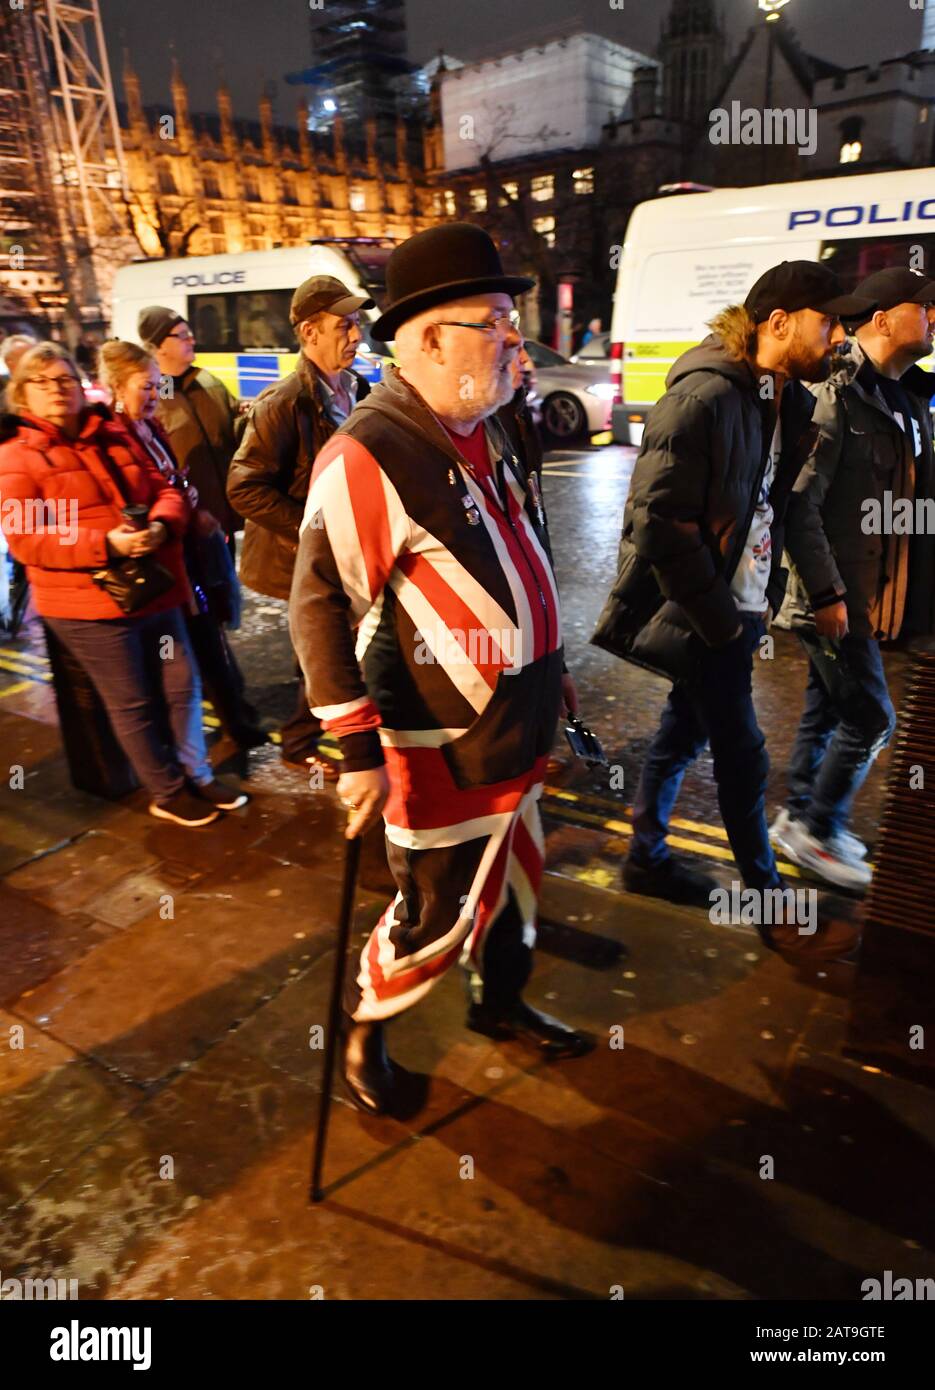 Parliament Square, London, UK. 31st January 2020. Union flag suited man wearing a bowler makes his way past police vans to the Leave Means Leave Brexit Celebration opposite the Houses of Parliament to mark the UK leaving the EU at 11.00pm. Credit: Malcolm Park/Alamy Live News. Stock Photo